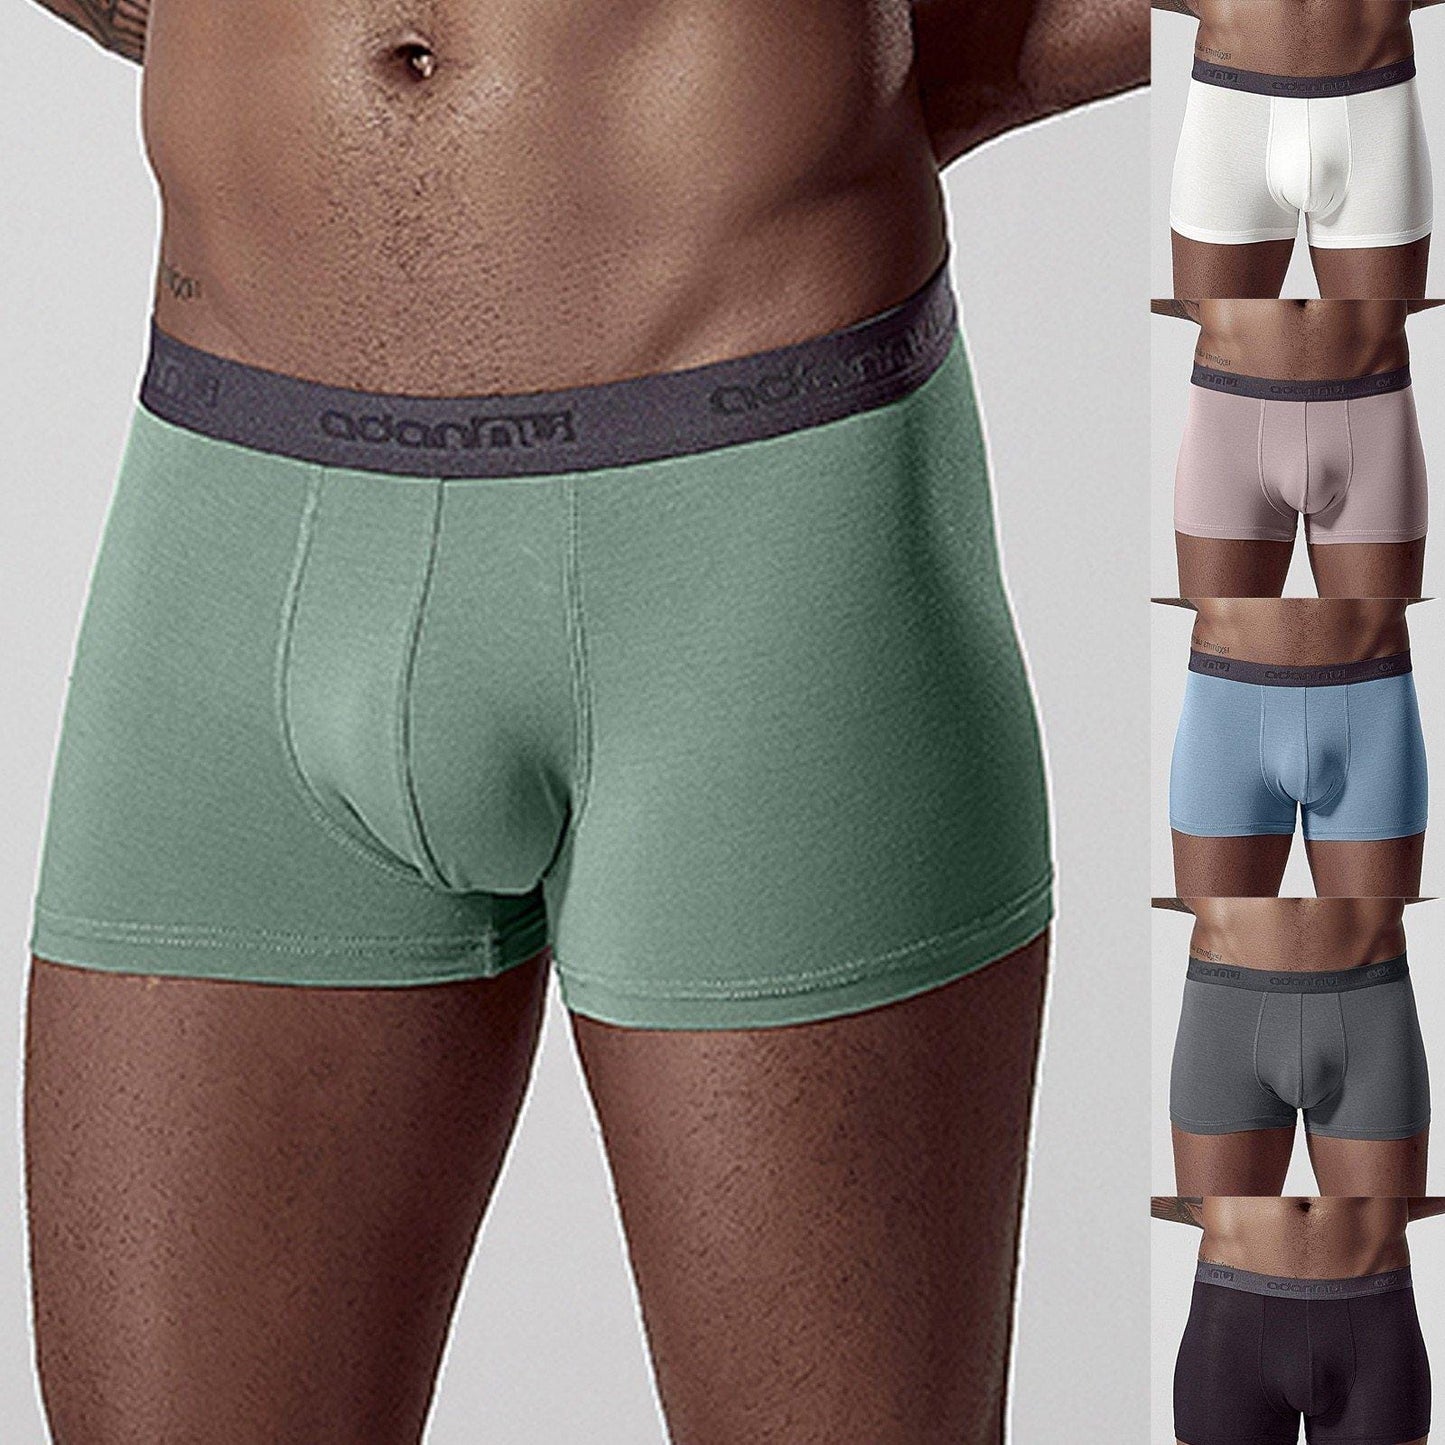 Comfort lined Boxer